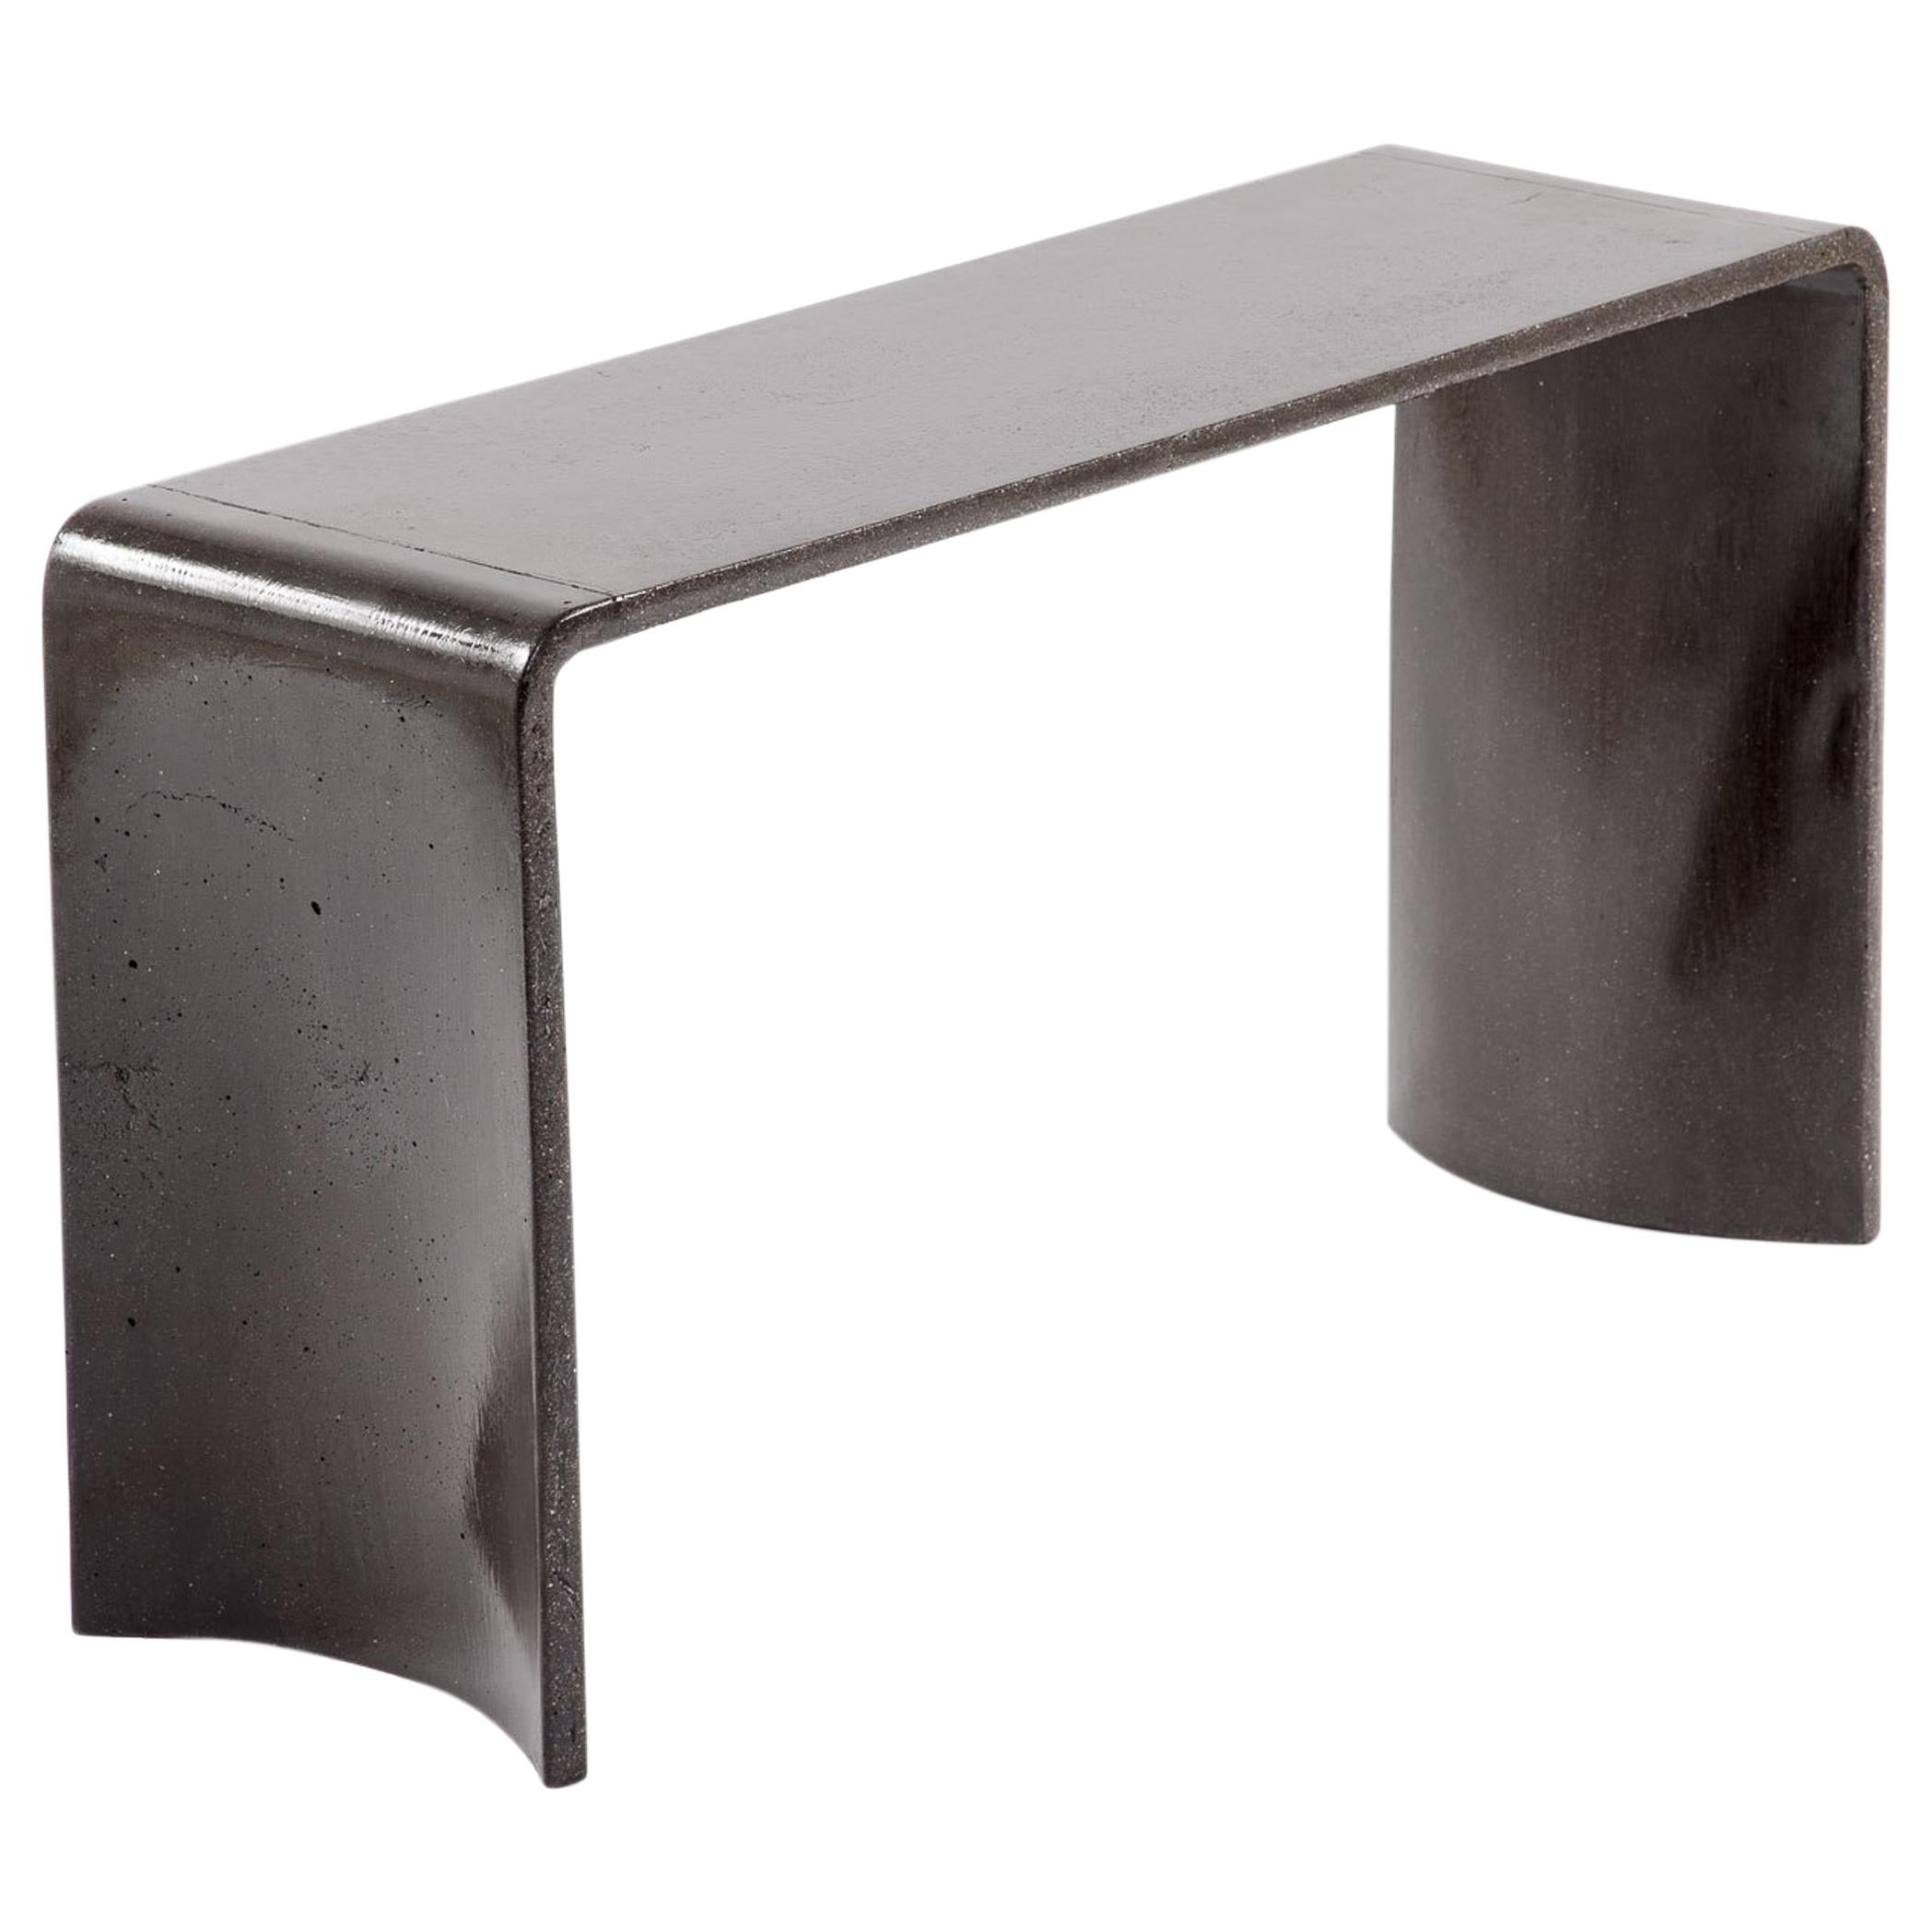 21st Century Concrete Contemporary Side Table, Dark Grey Glossy Cement